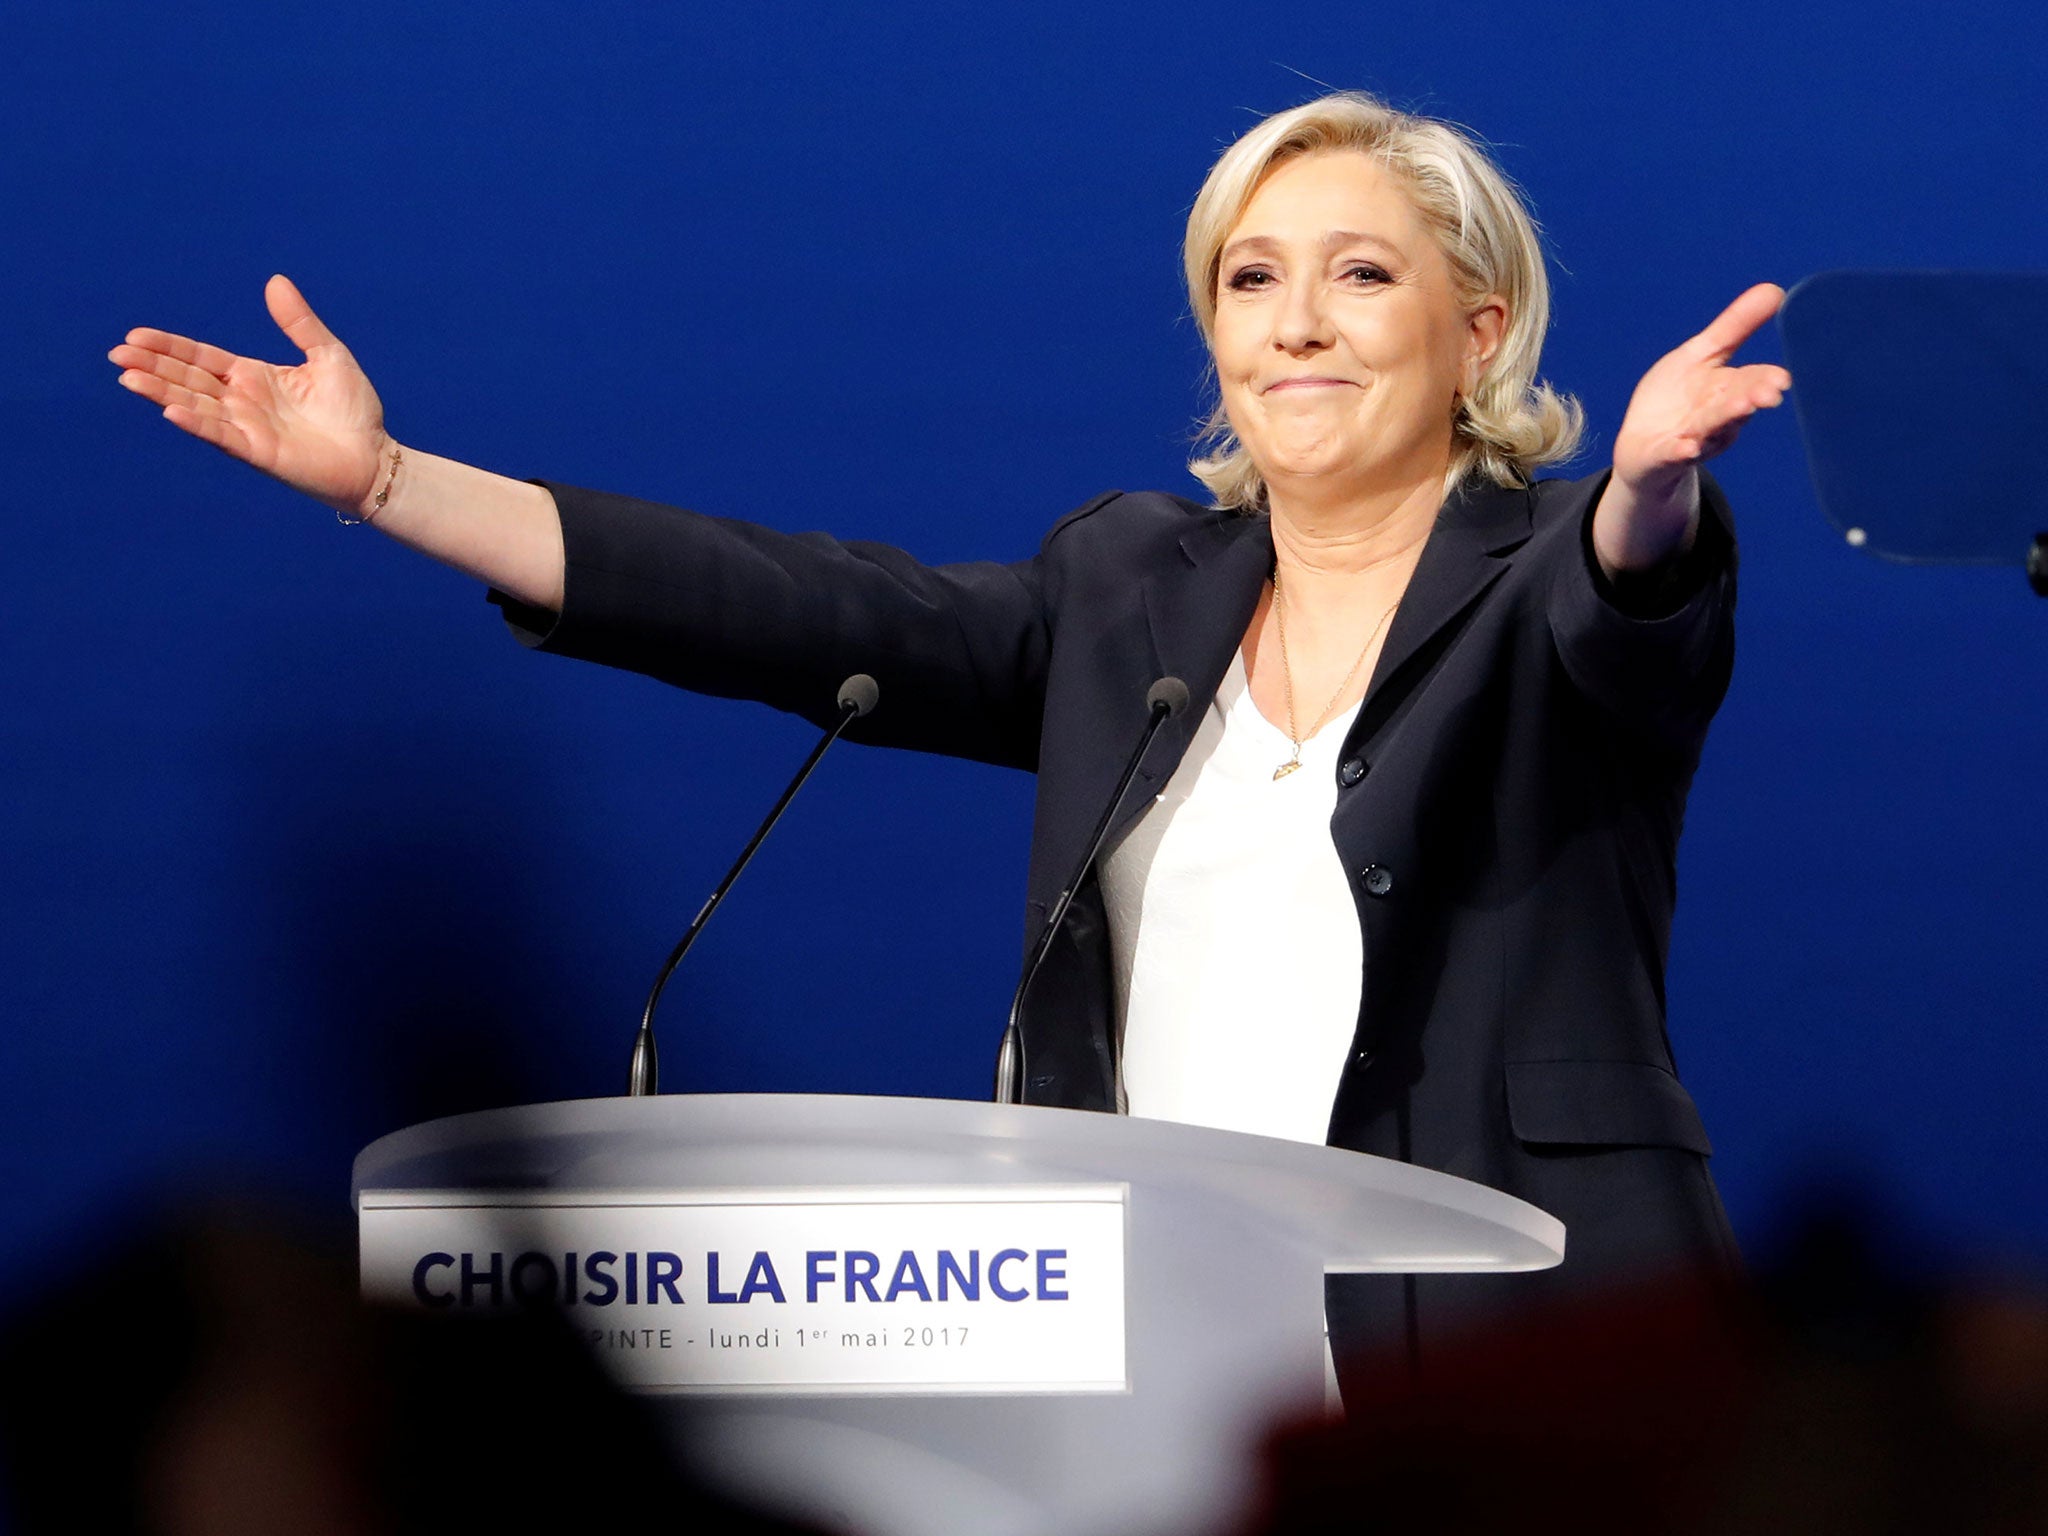 Marine Le Pen speaks at a a campaign rally in Villepinte, near Paris, on 1 May